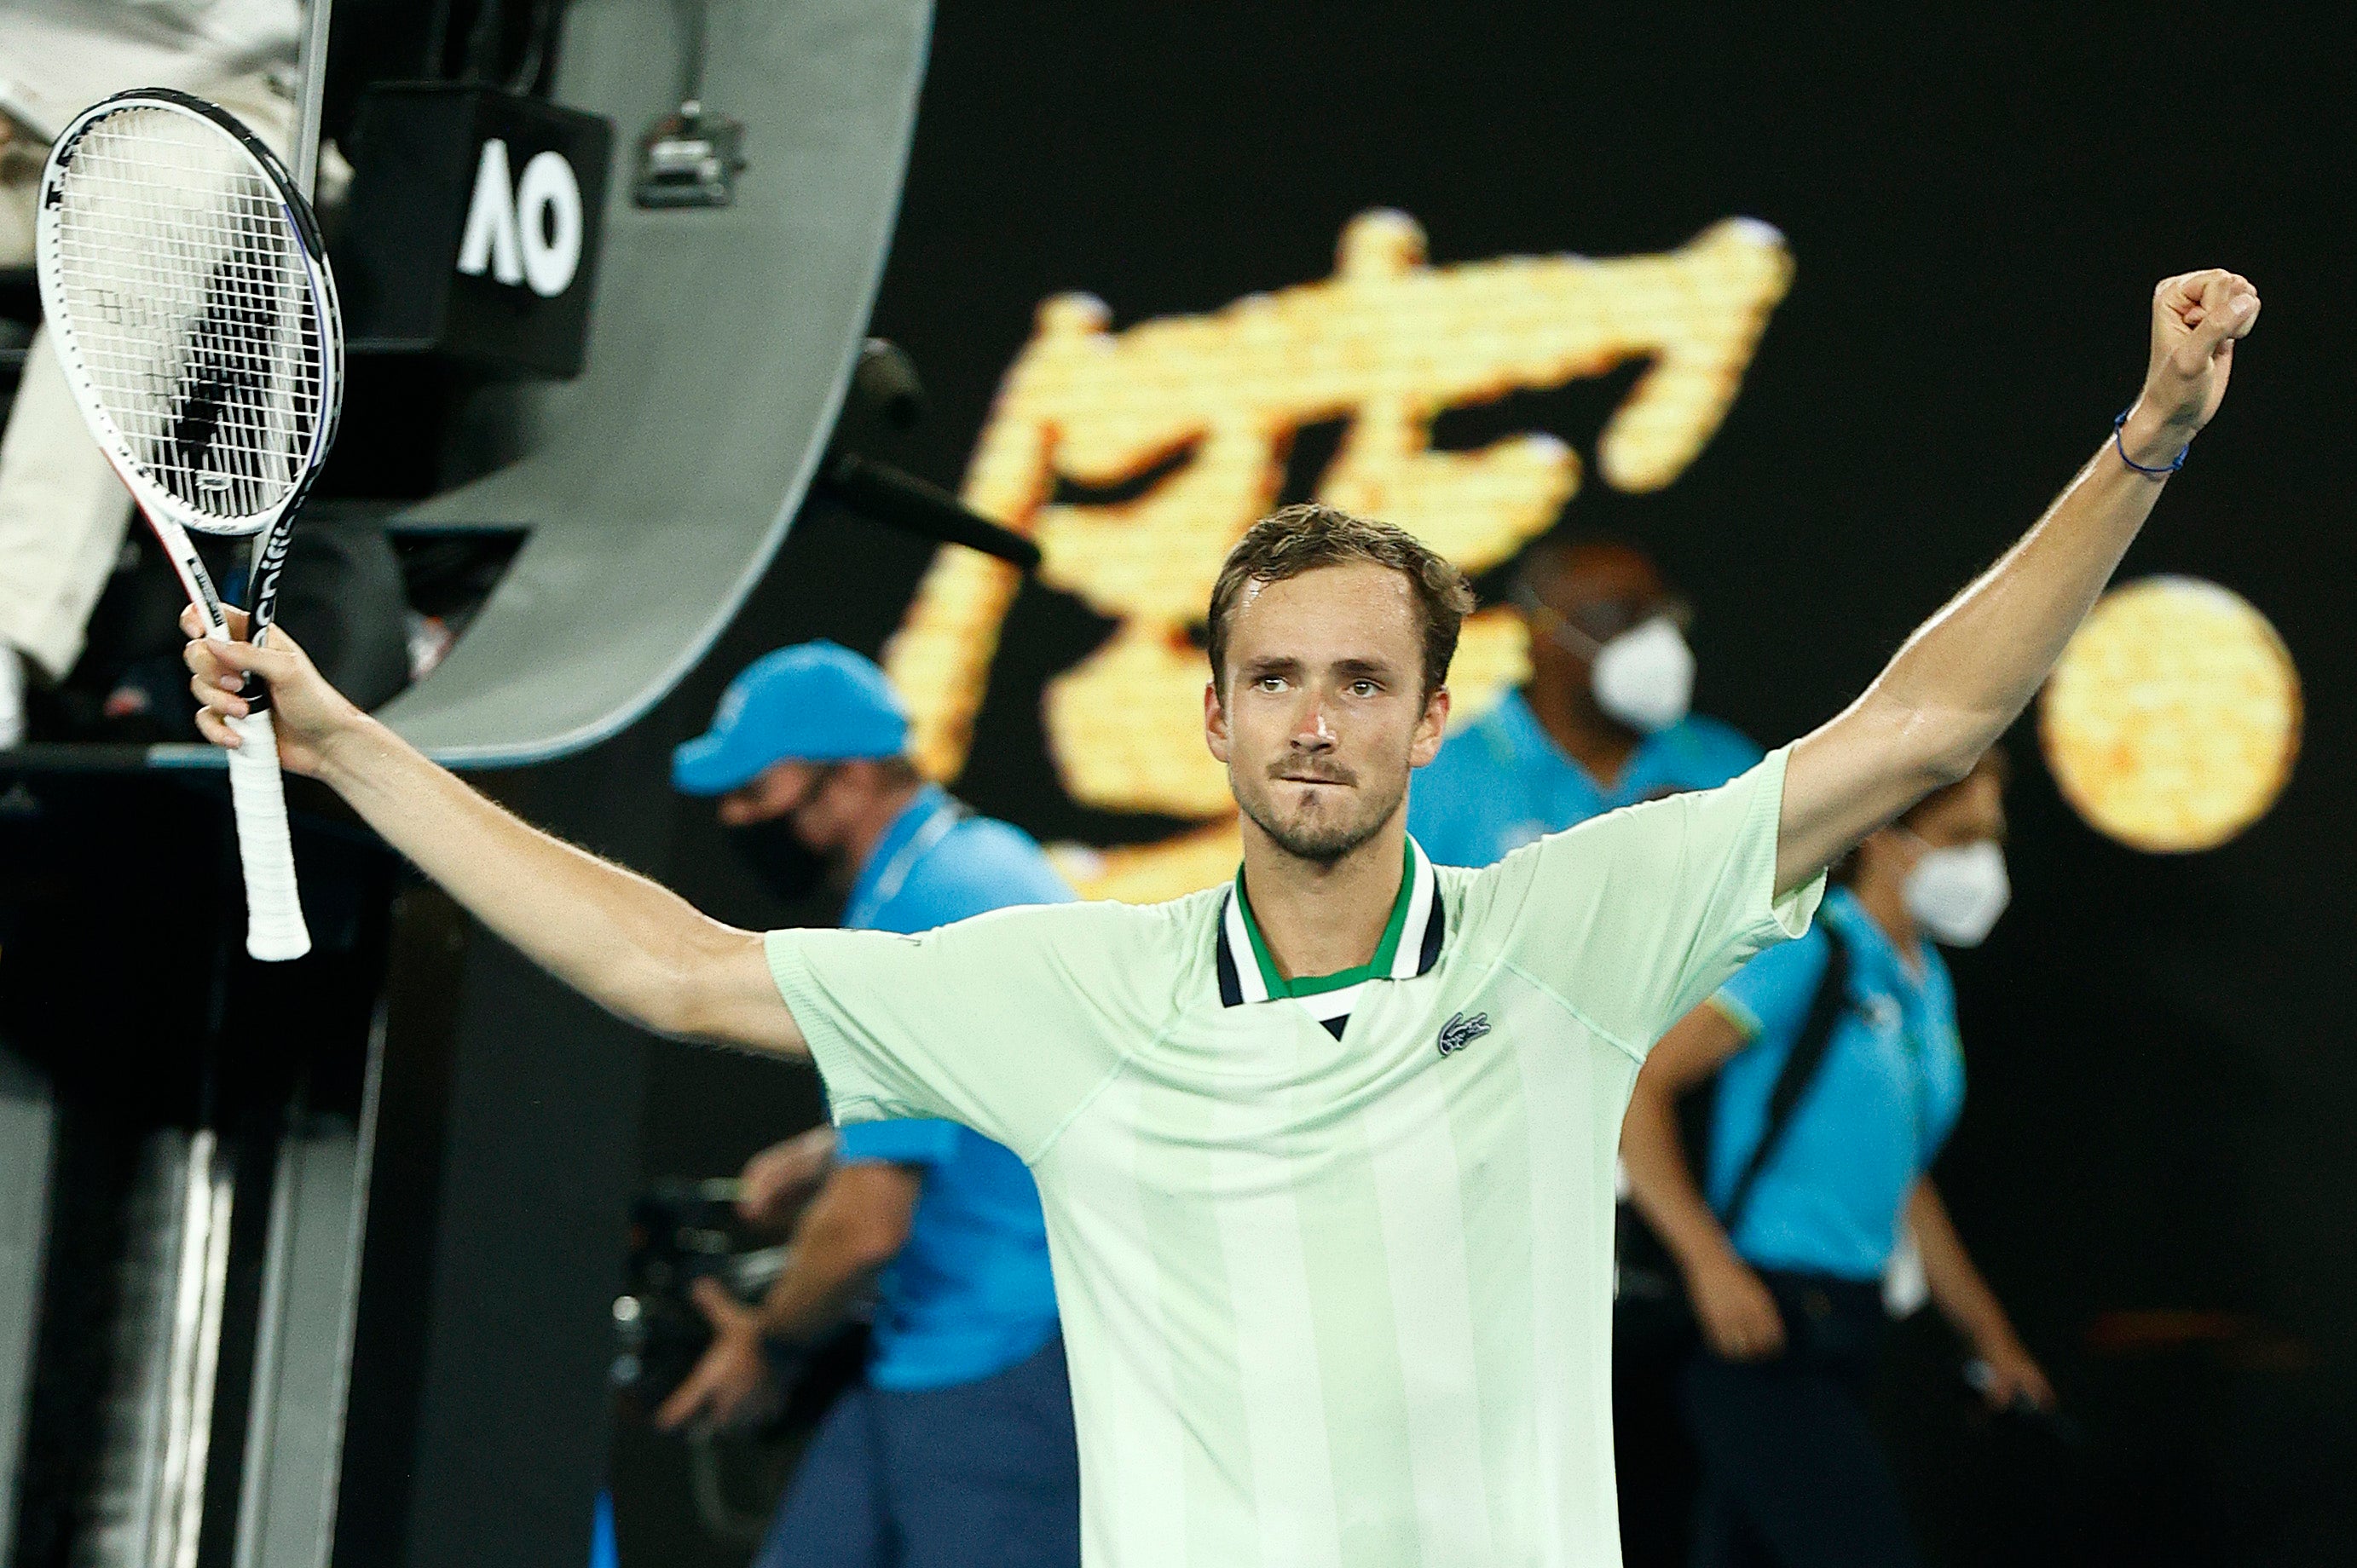 Daniil Medvedev saved match point before defeating Felix Auger-Aliassime